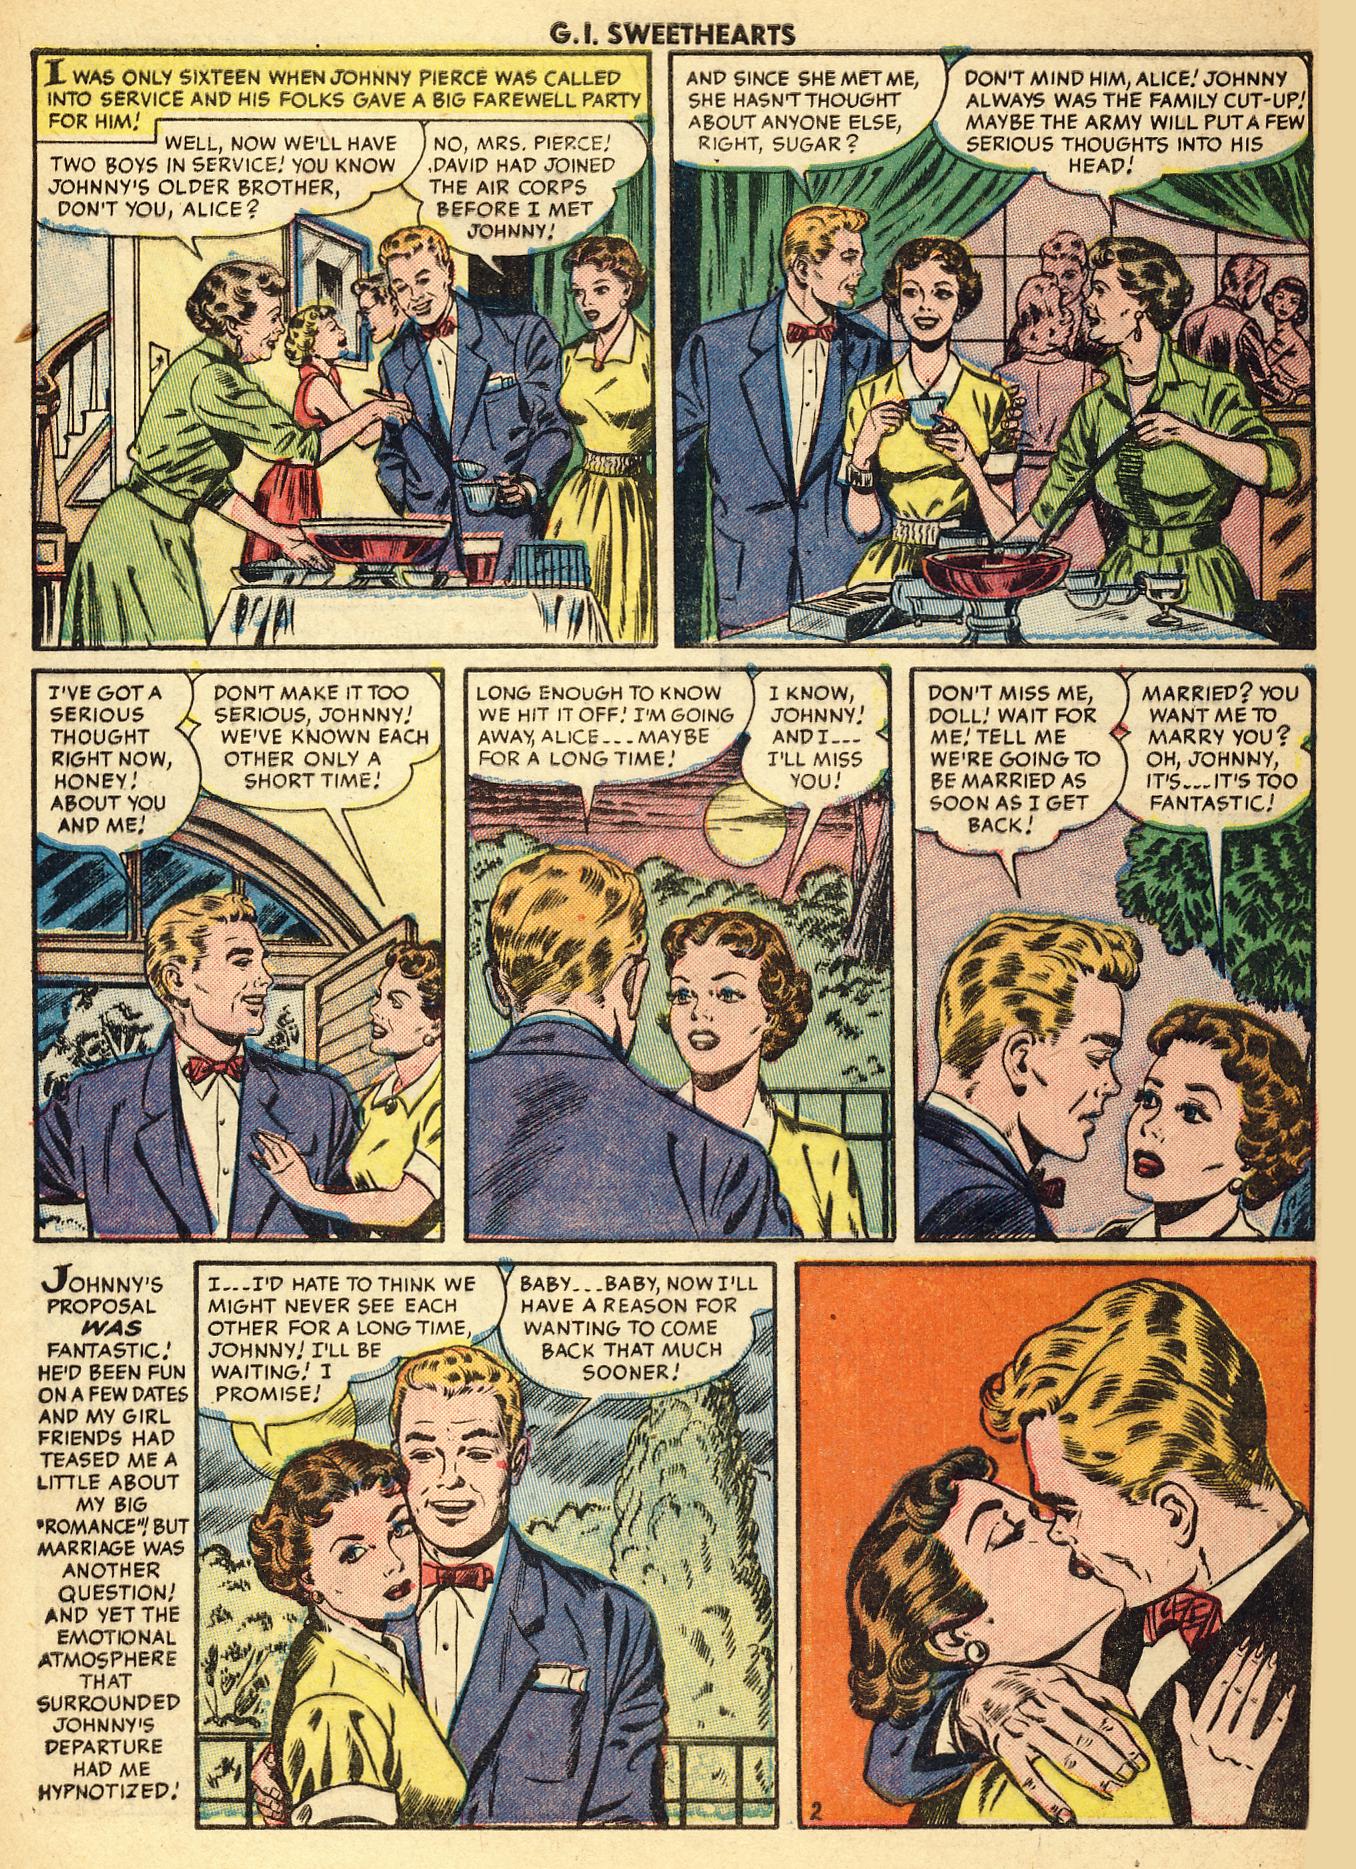 Read online G.I. Sweethearts comic -  Issue #41 - 4